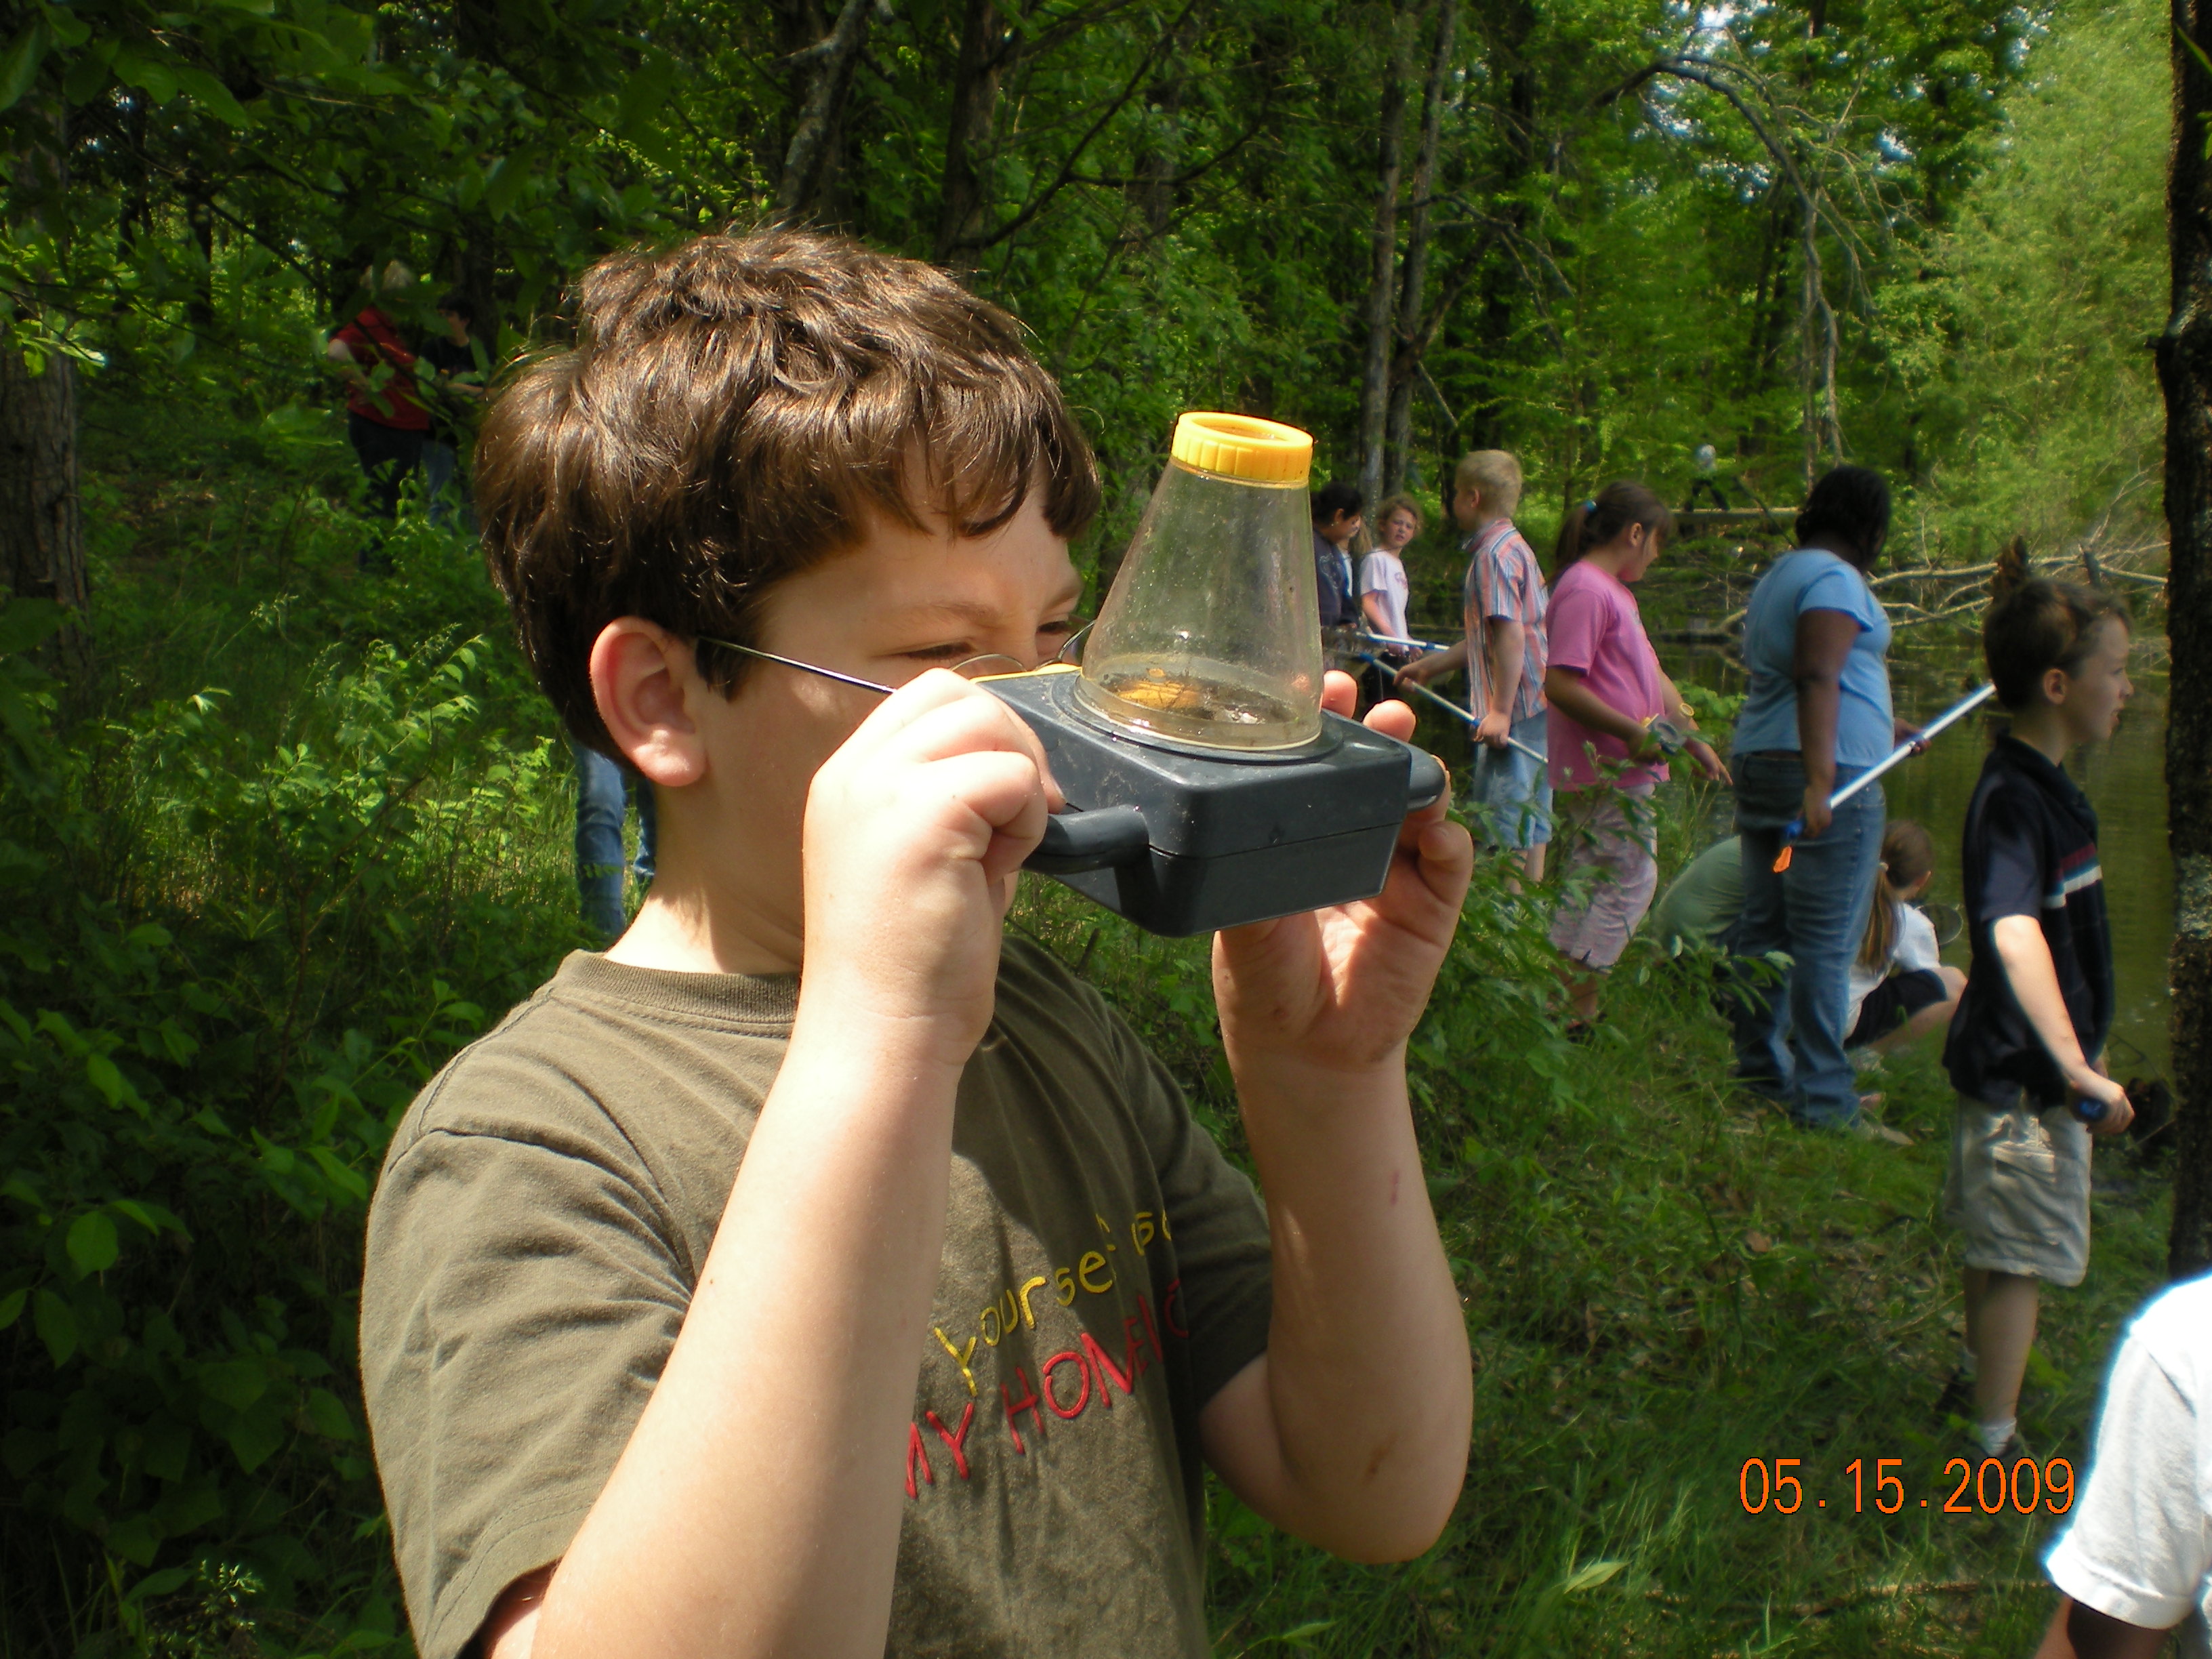 Hawthorne Elementary 3rd Grade student using an observation container to explore the pond